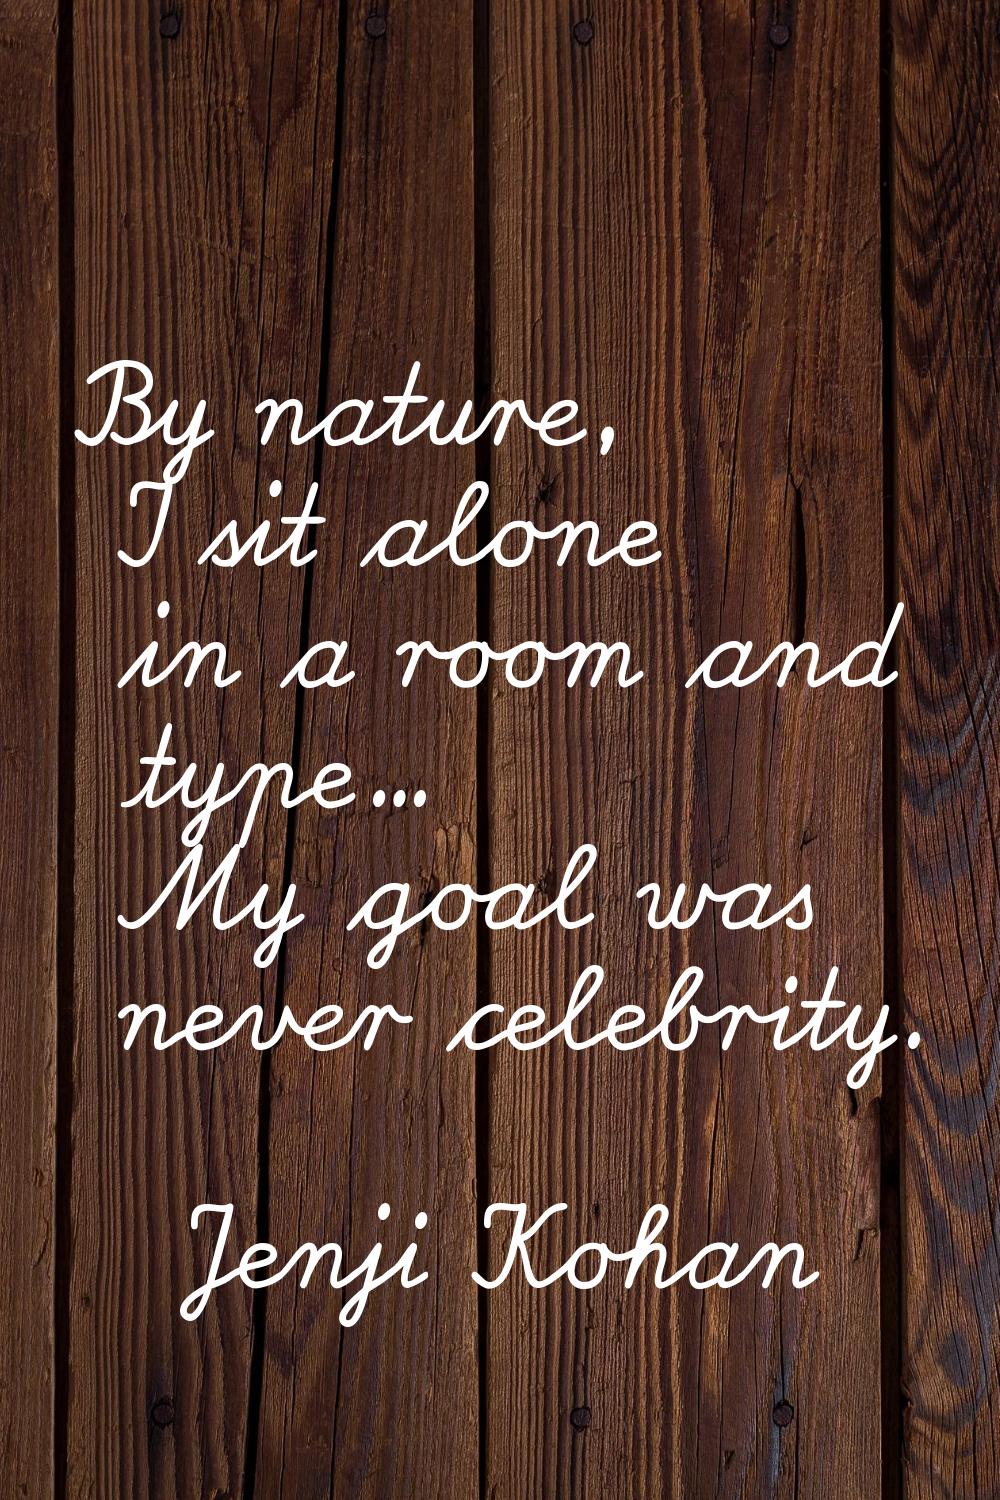 By nature, I sit alone in a room and type... My goal was never celebrity.